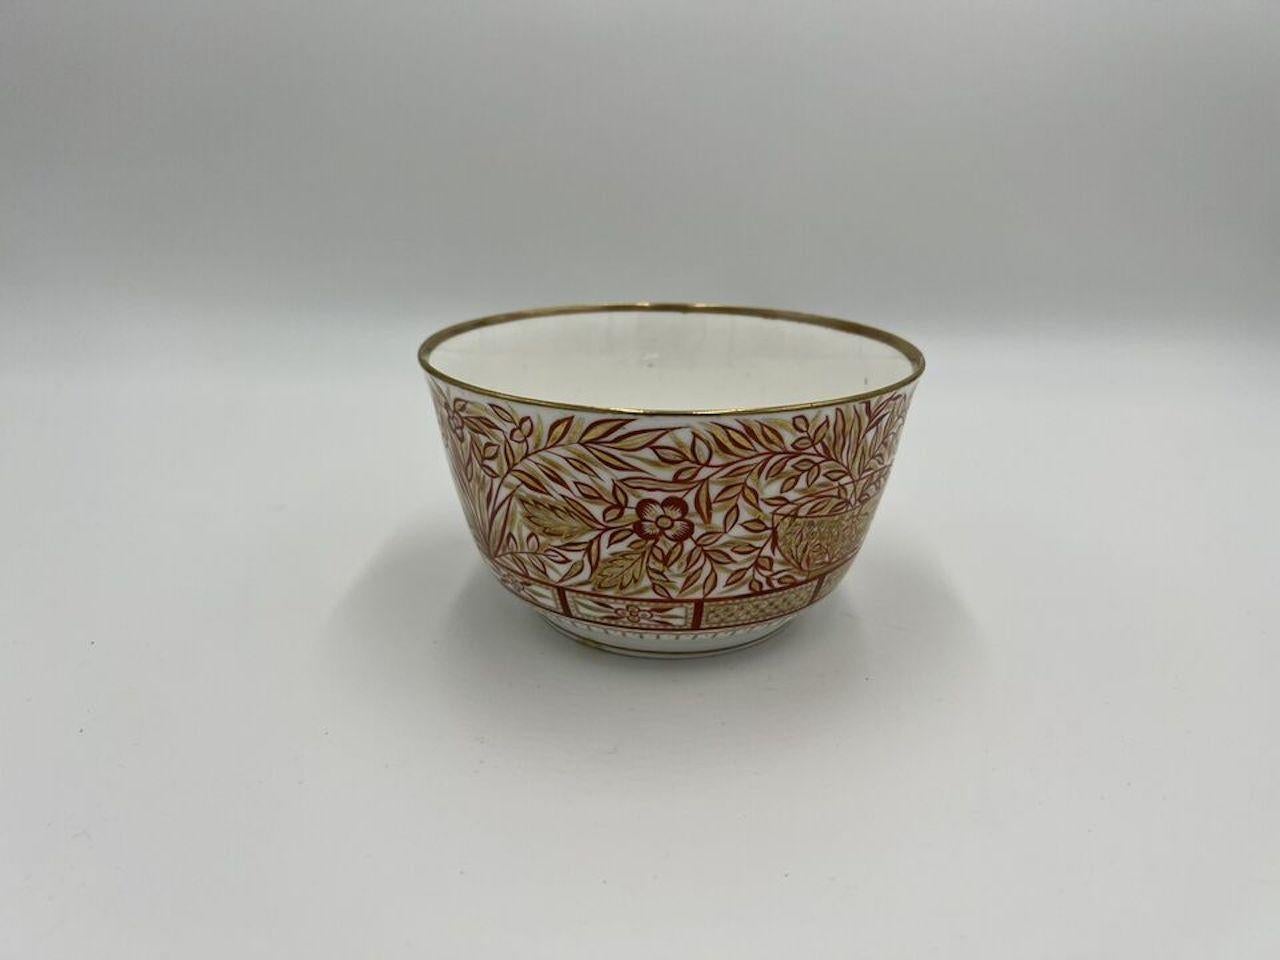 Antique English Mintons Porcelain Chinoiserie Waste Bowl Circa 1830 For Sale 2